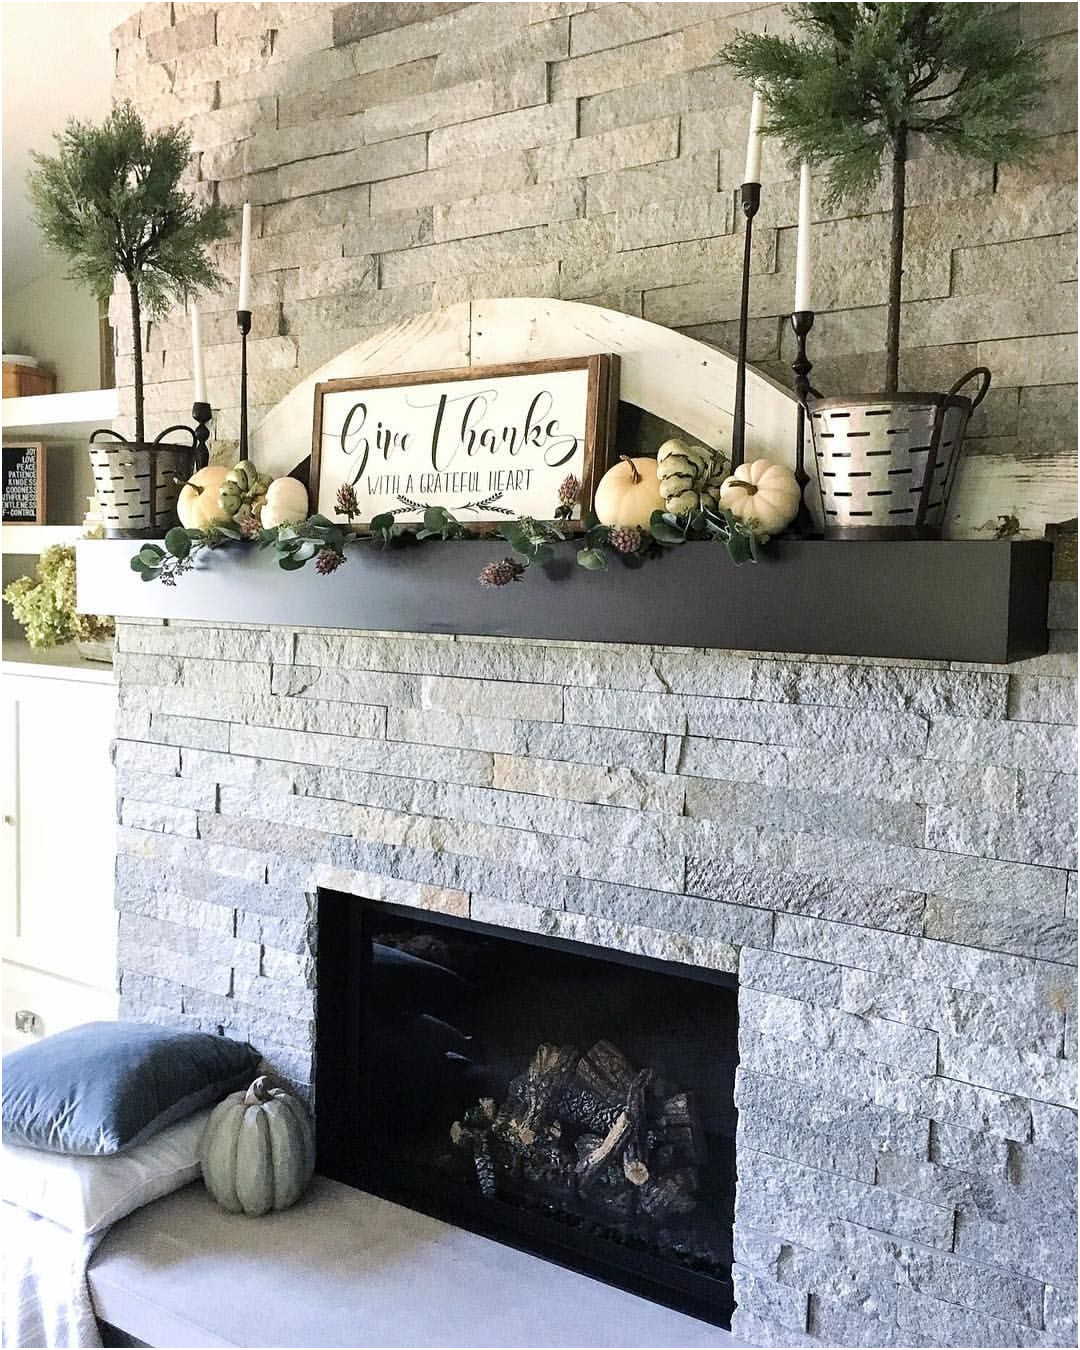 New Refacing A Fireplace Ideas